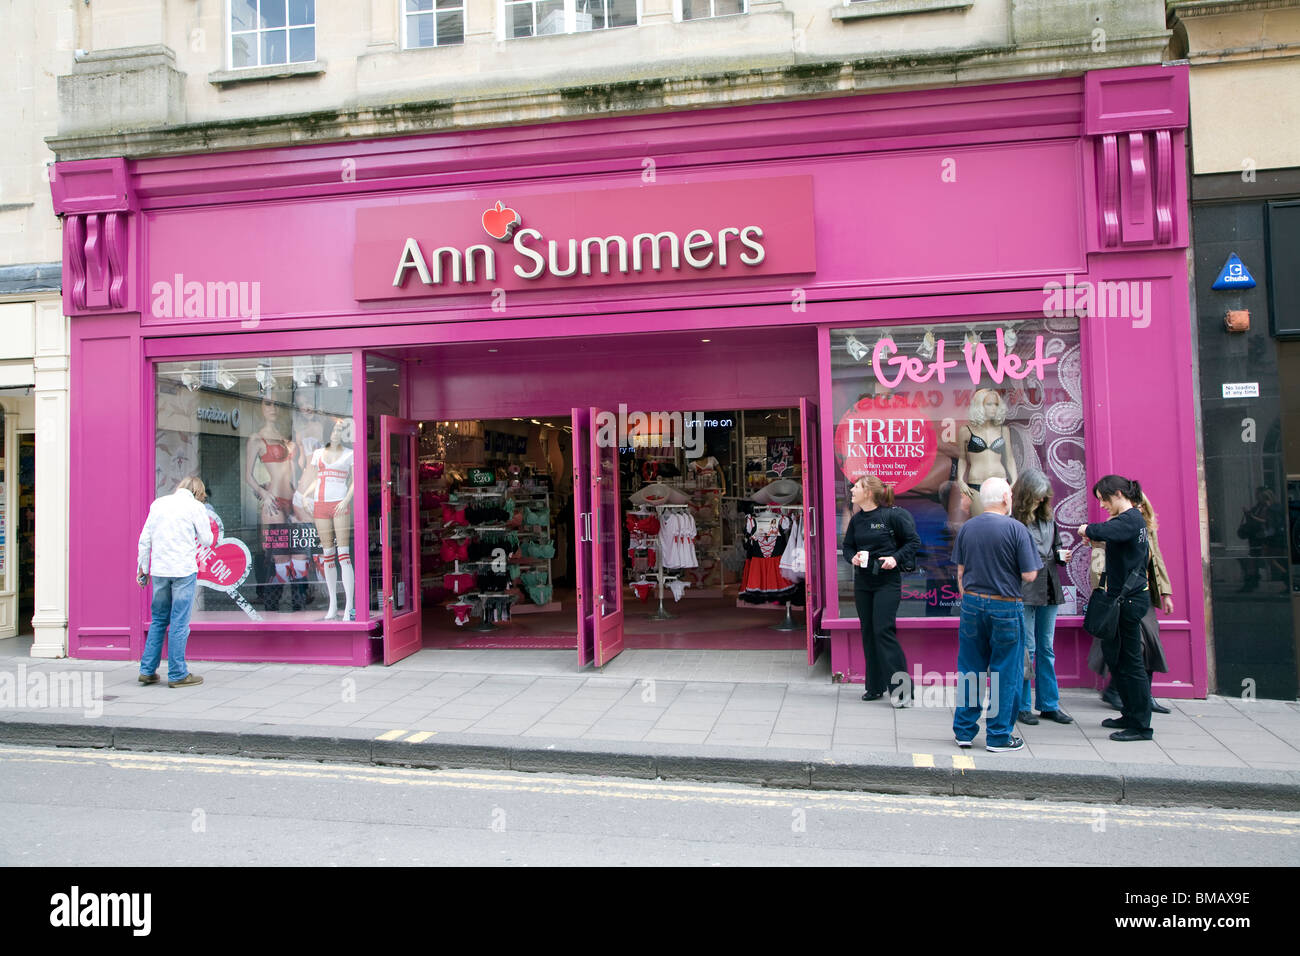 Ann Summers Shop High Resolution Stock Photography and Images - Alamy